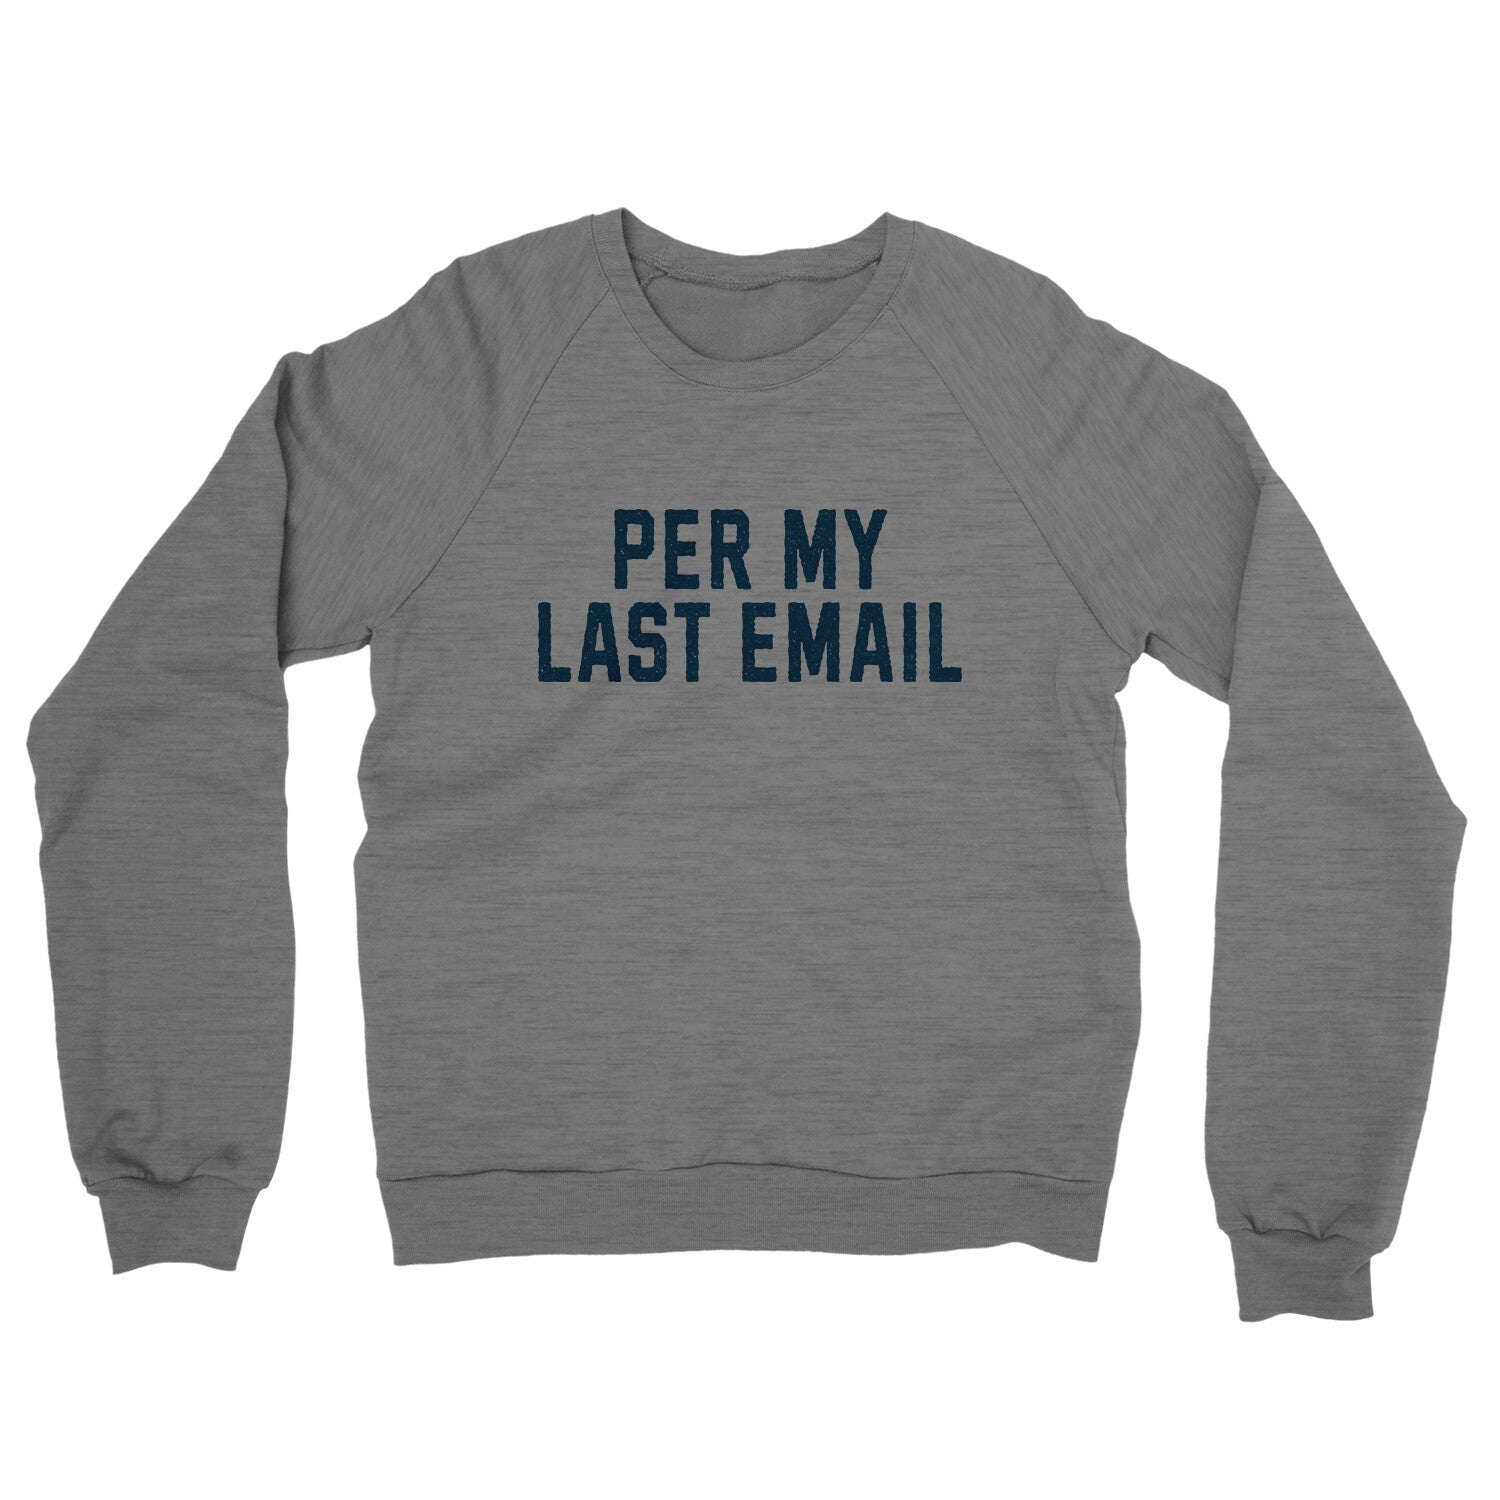 Per My Last Email in Graphite Heather Color